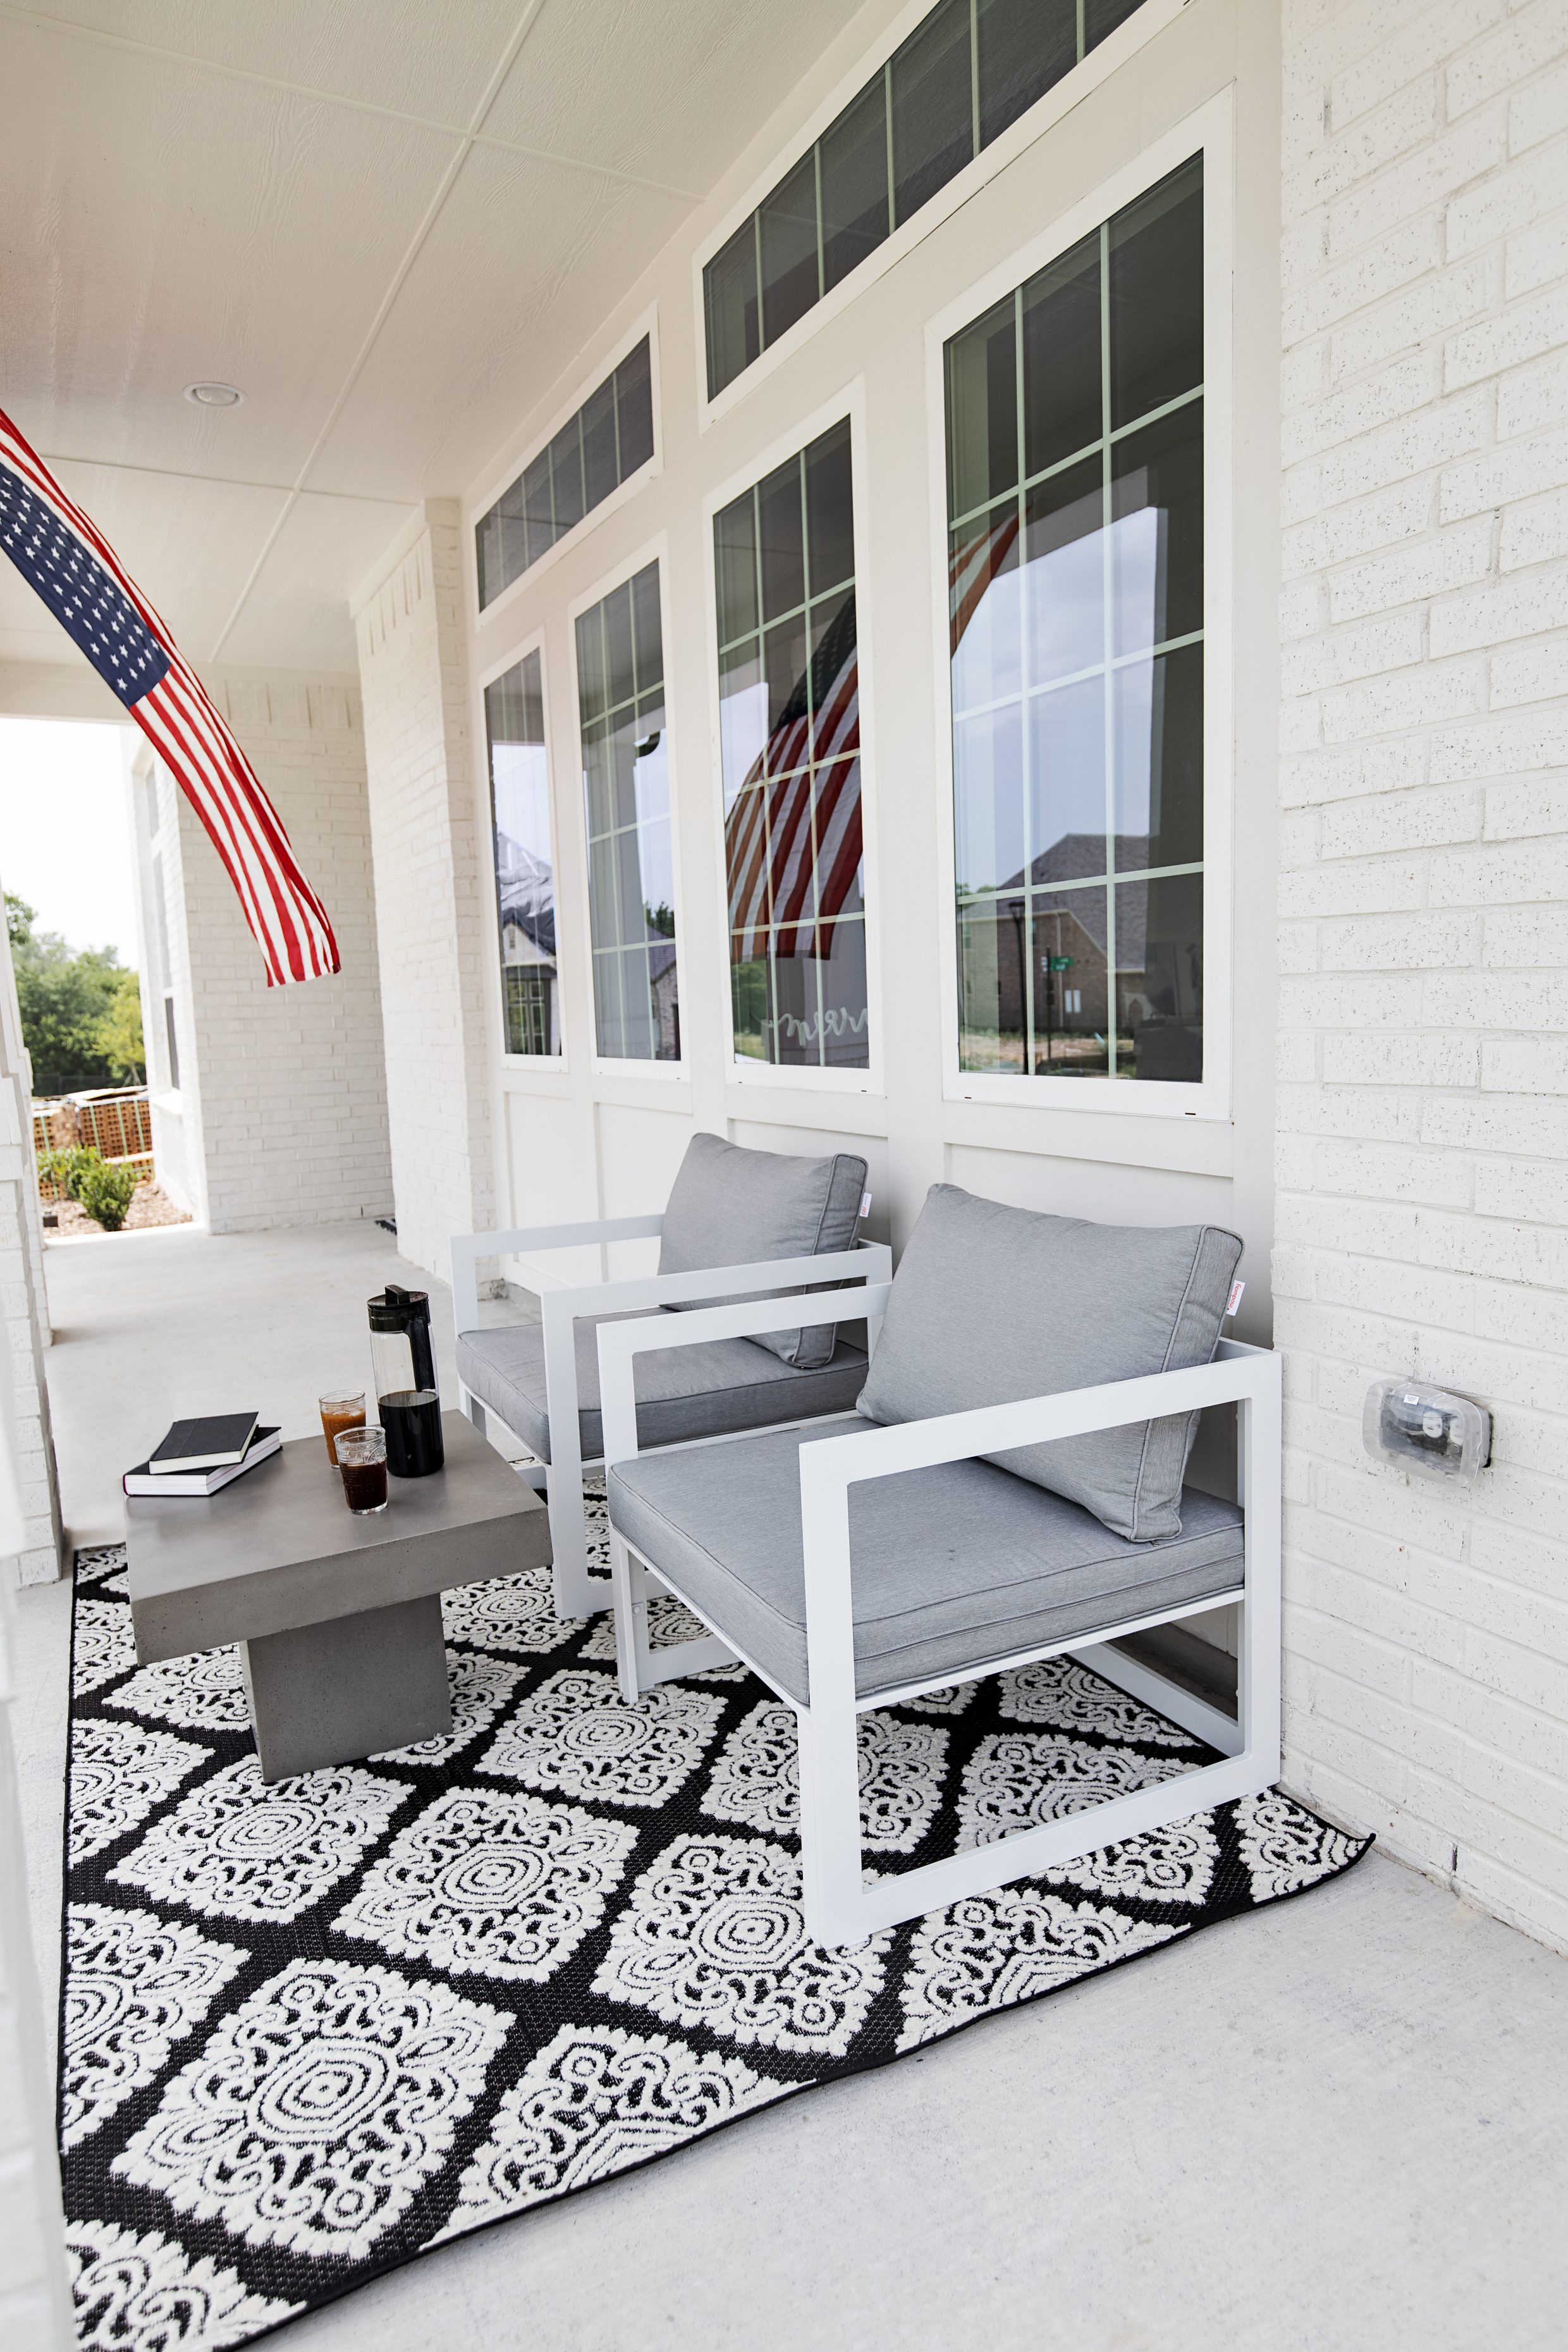 Modern outdoor furniture on front yard patio with white and gray chairs, concrete table, black and white rug and American flag on a white painted brick home